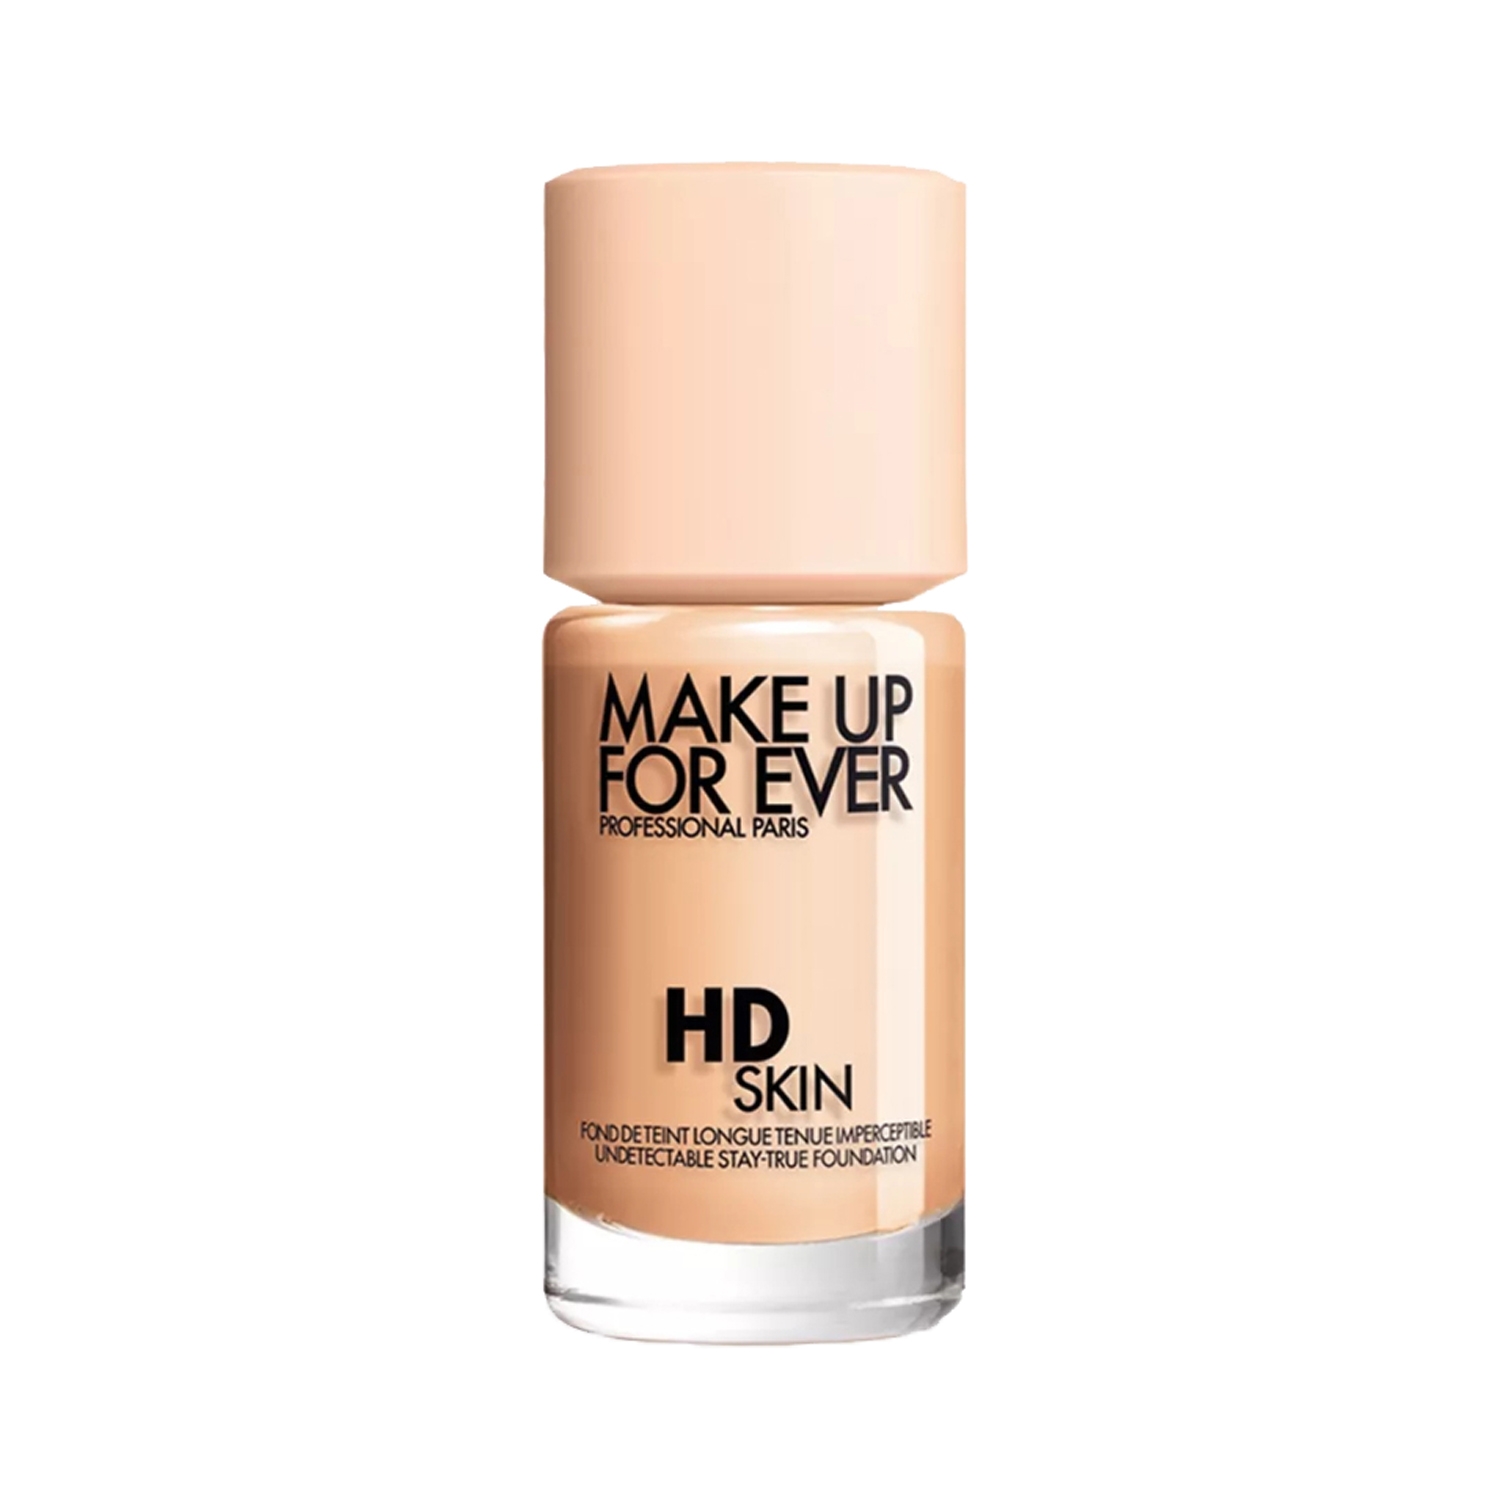 Make Up For Ever | Make Up For Ever Hd Skin Foundation-1Y08 (Y225) (30ml)